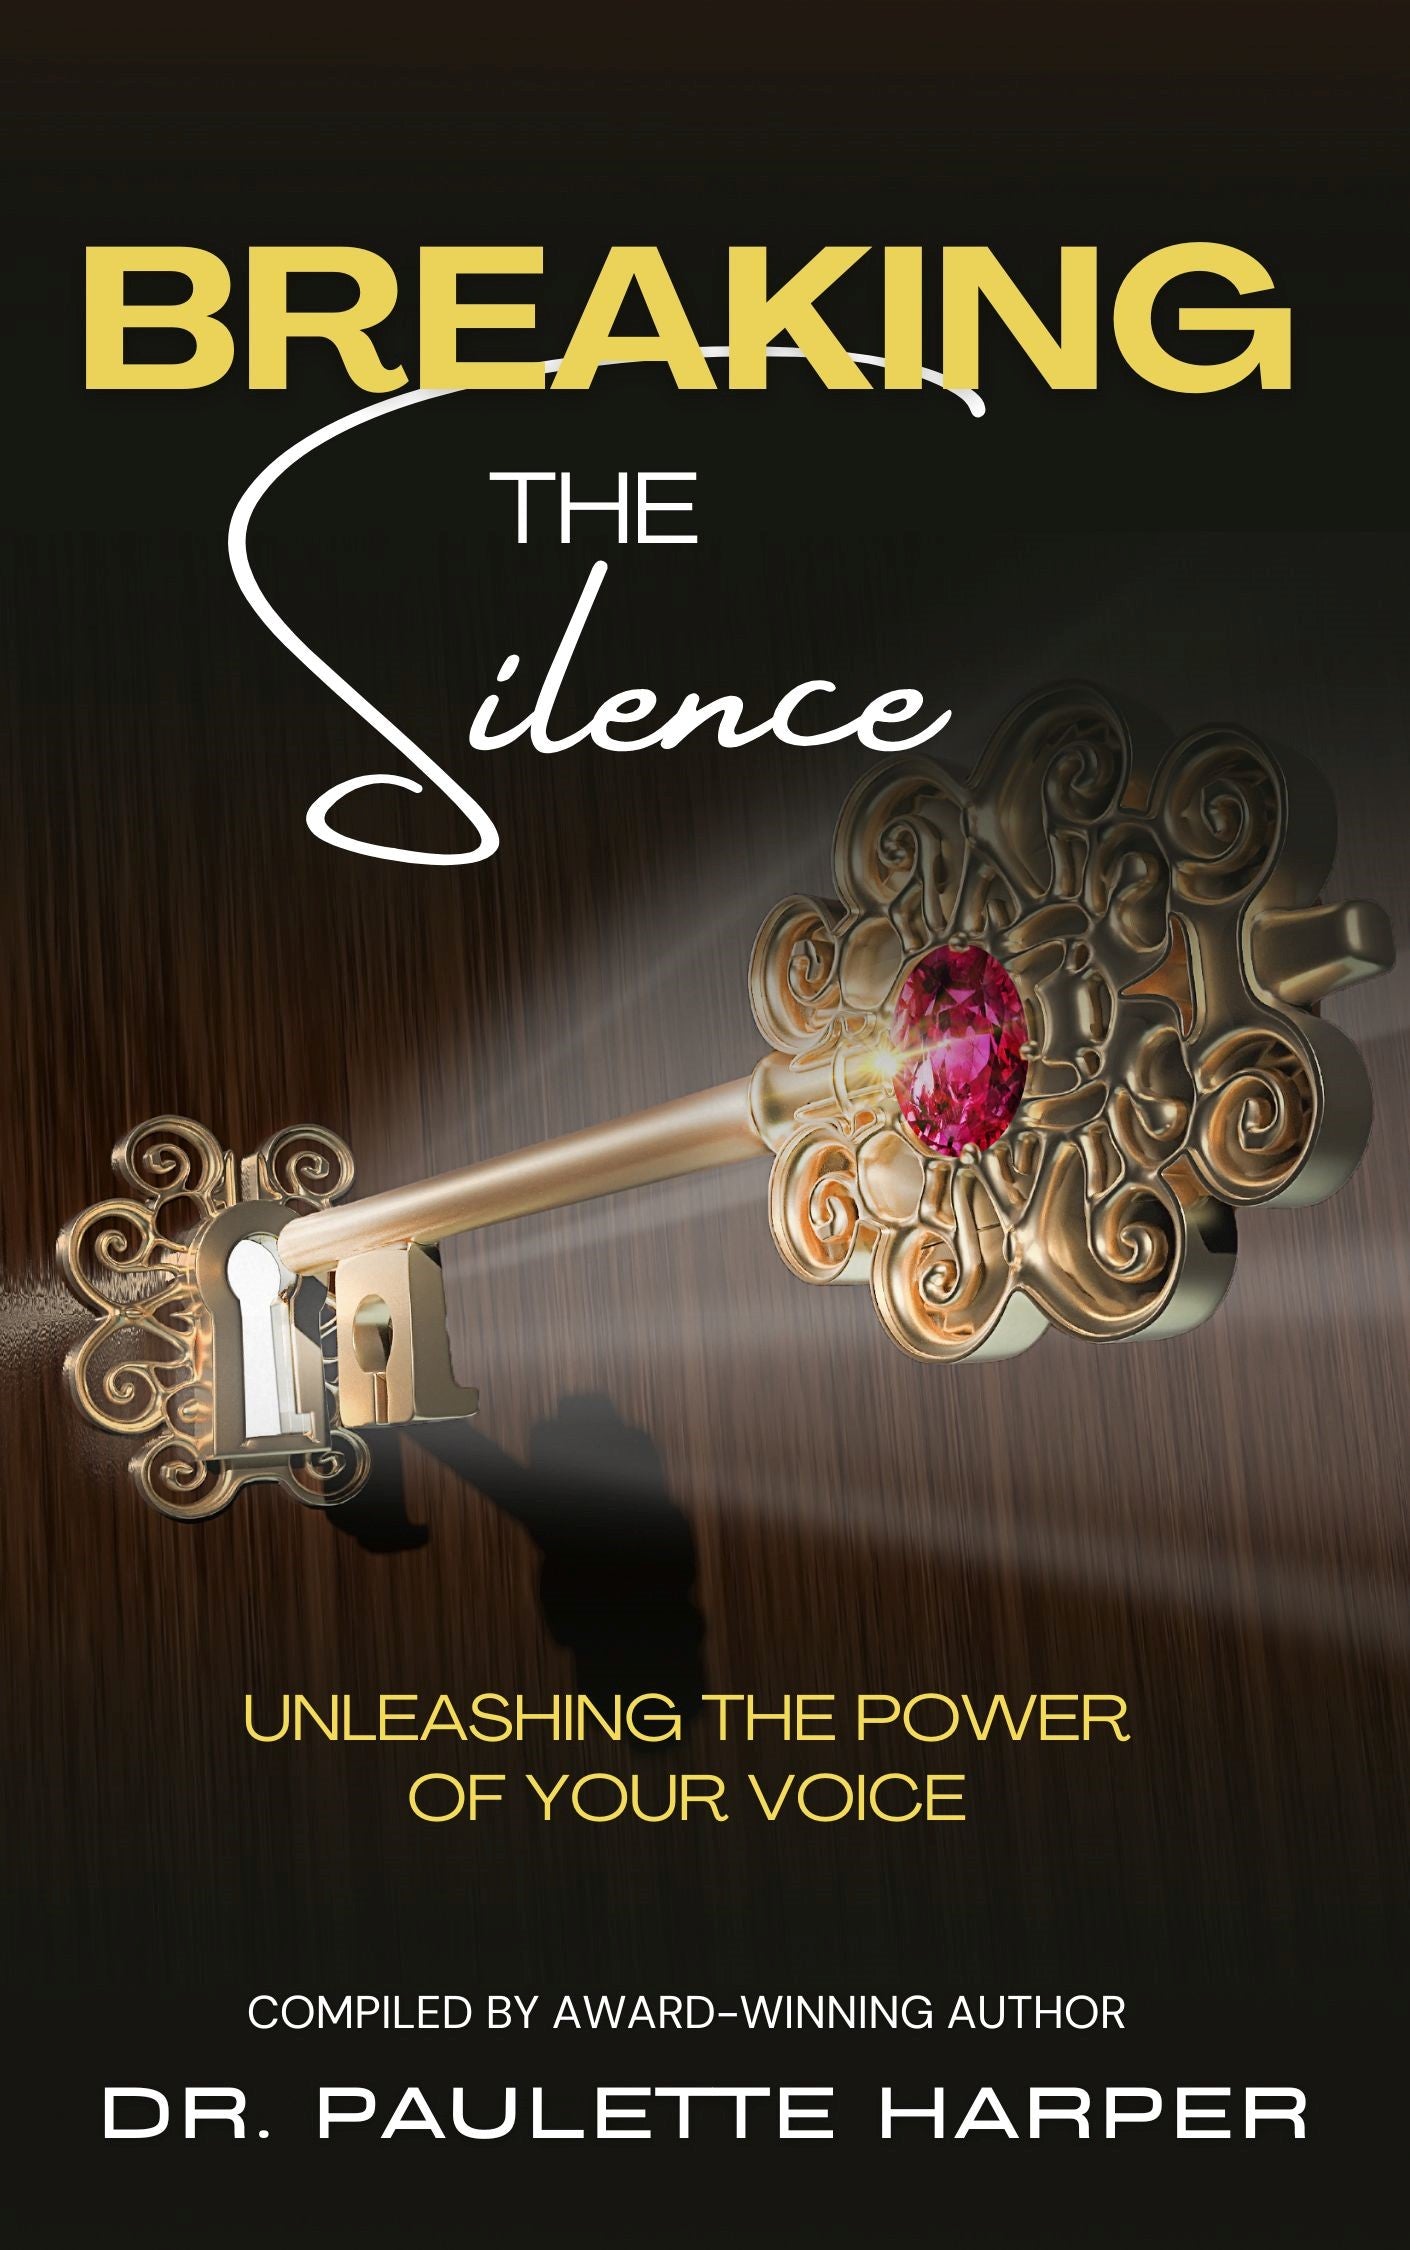 Paperback - Breaking The Silence: Unleashing the Power of Your Voice